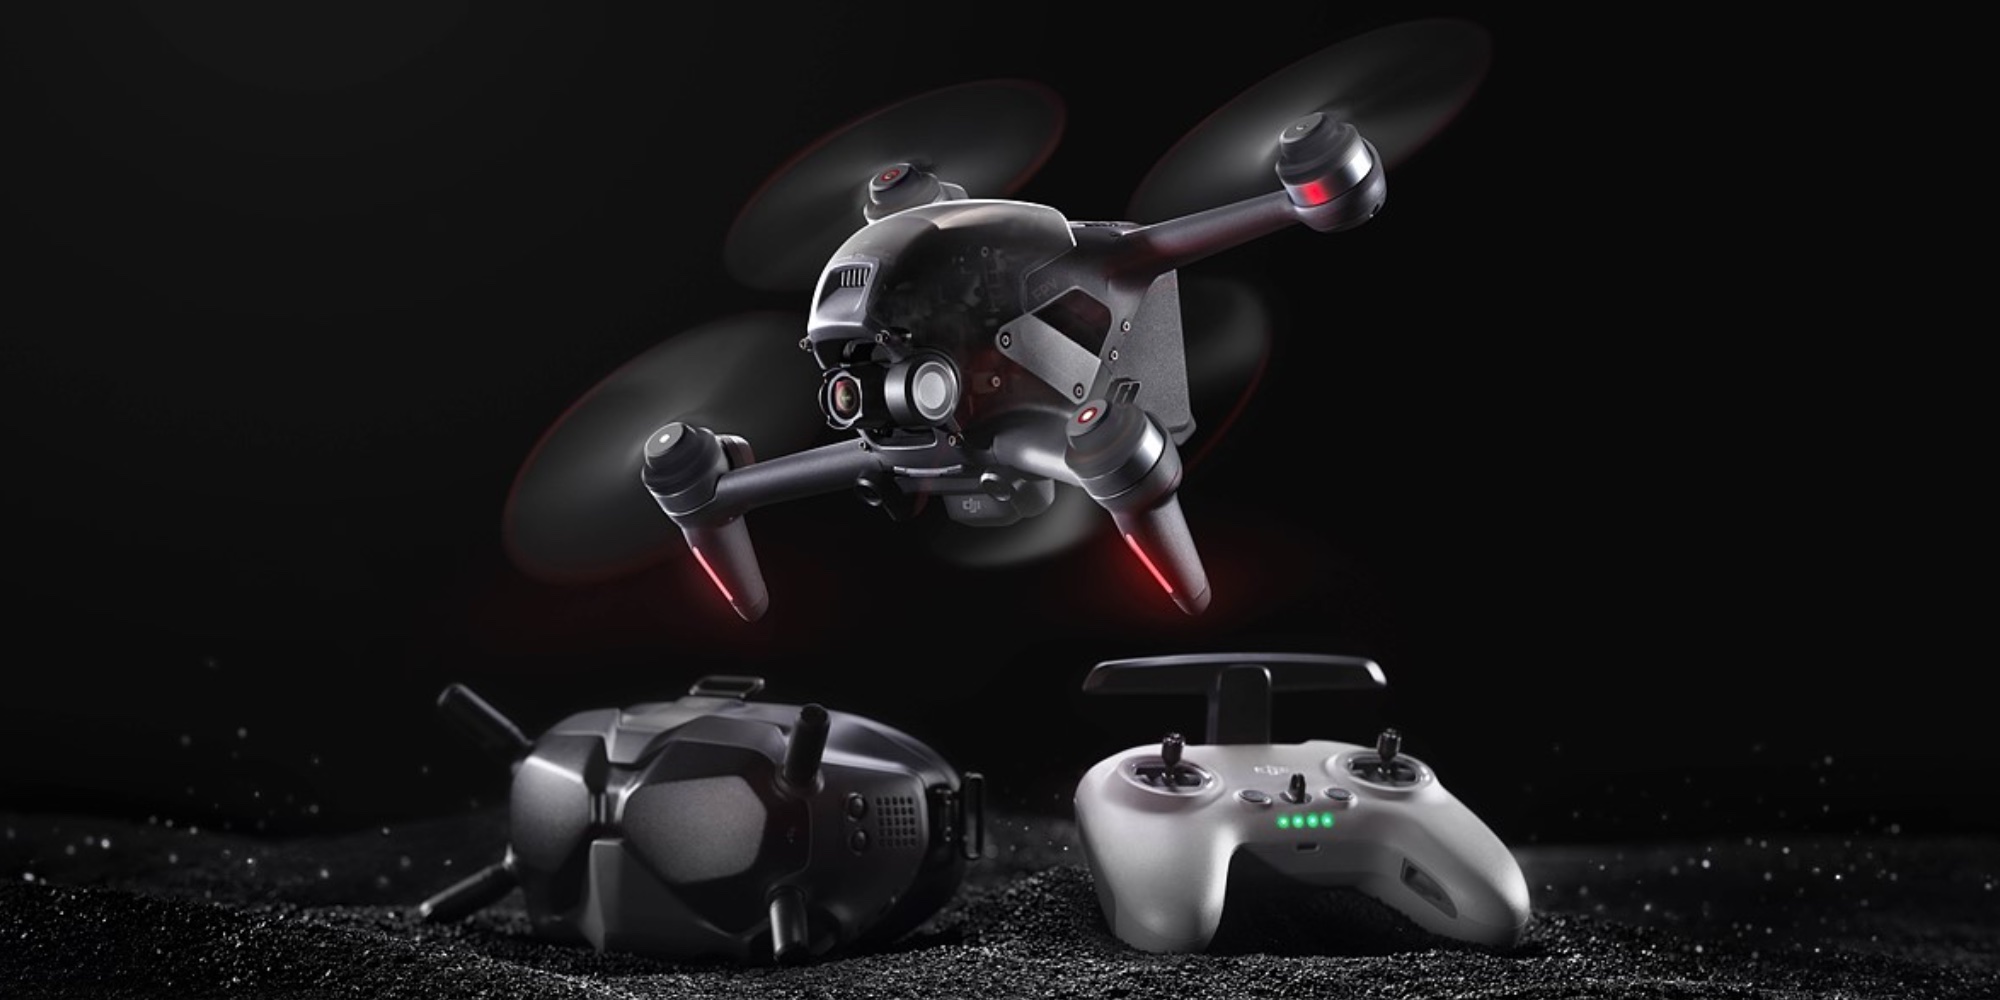 Dalset Ocean Tvunget DJI FPV drone combo falls to $899 in Black Friday 2022 deal